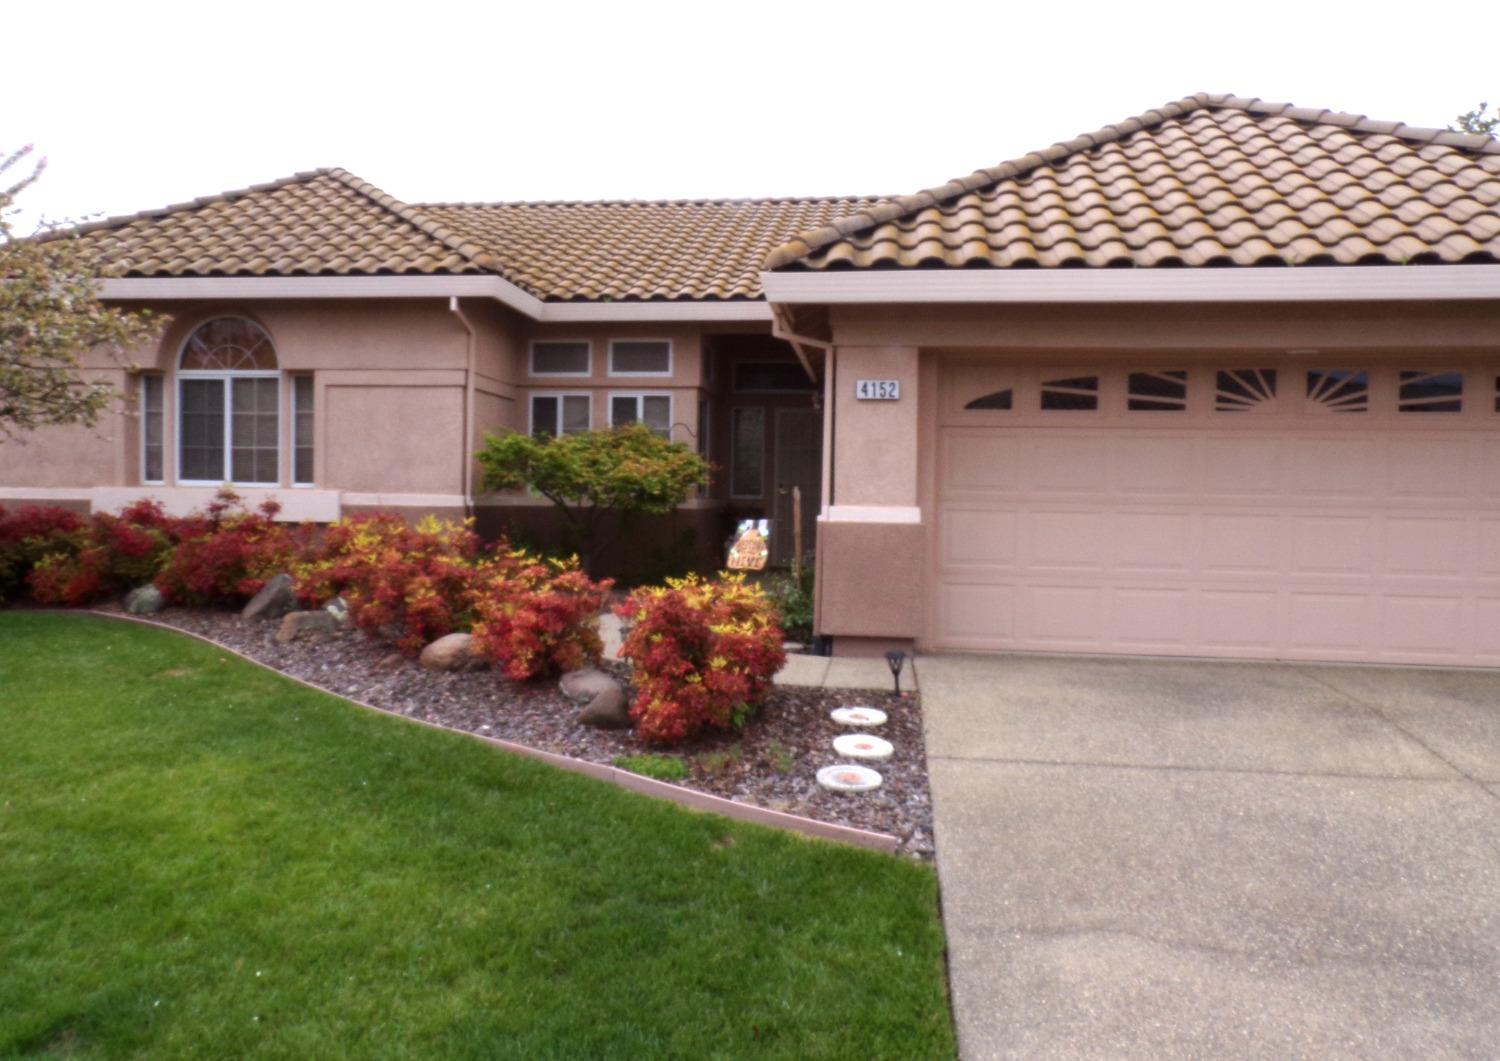 Photo of 4152 Enchanted Cir in Roseville, CA